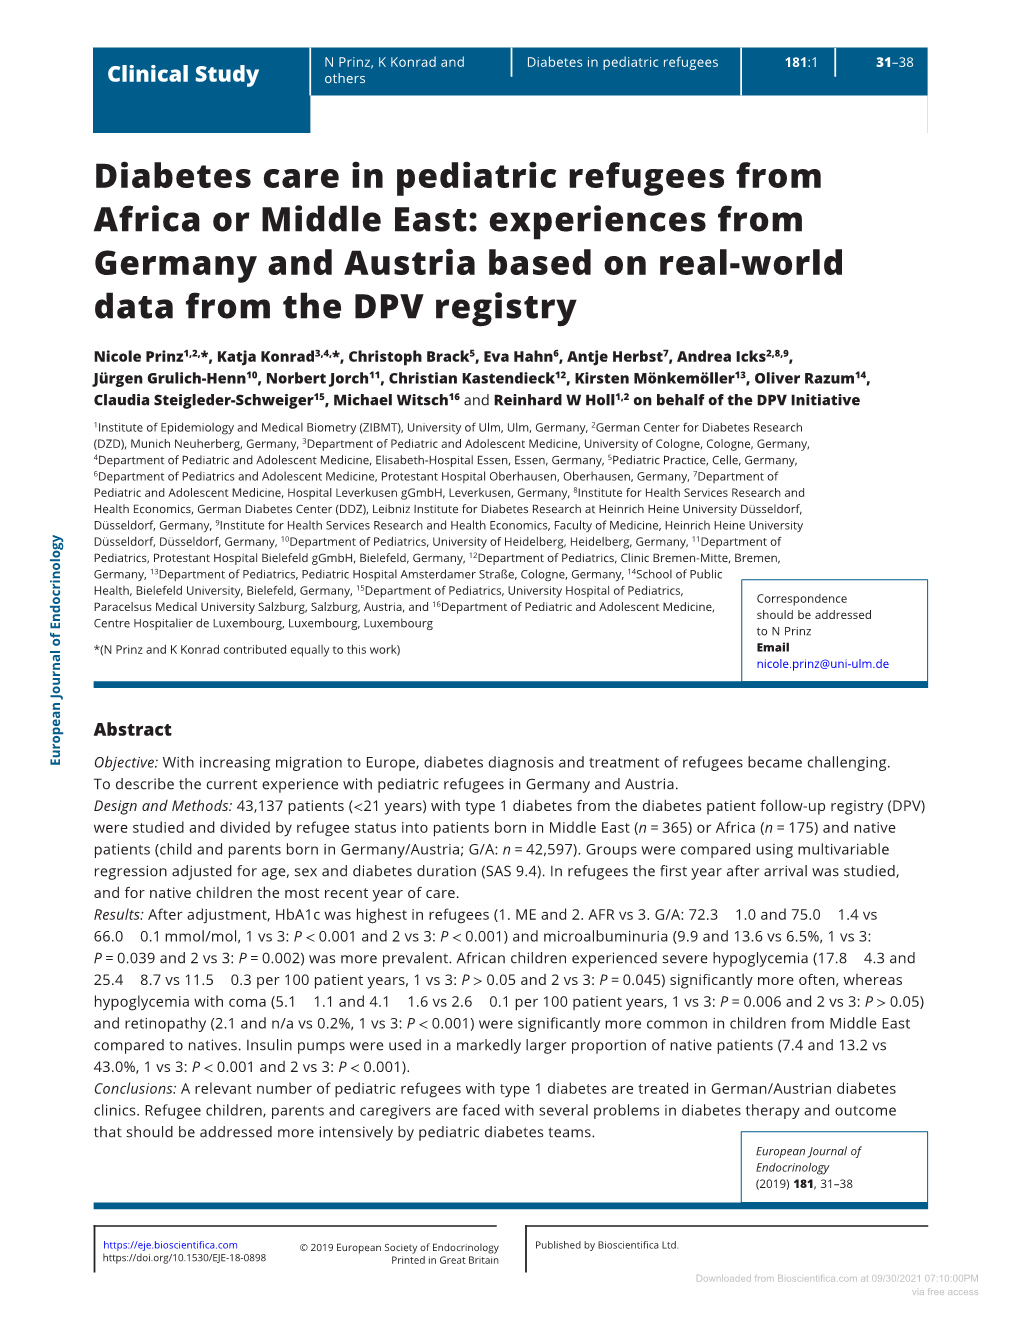 Diabetes Care in Pediatric Refugees from Africa Or Middle East